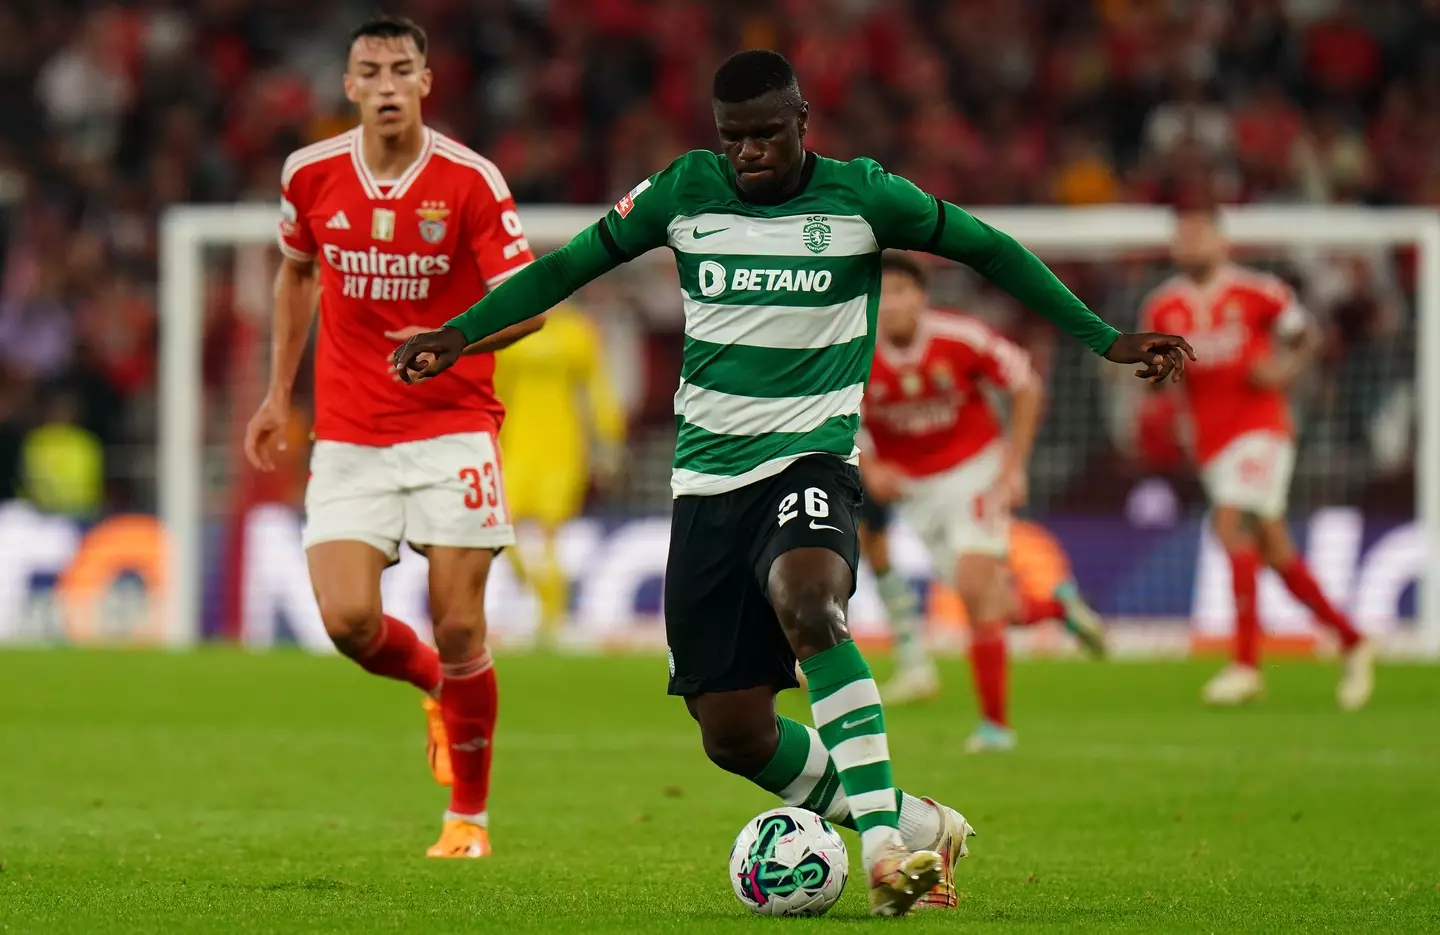 Diomande has been linked with a move to the Premier League. (Image